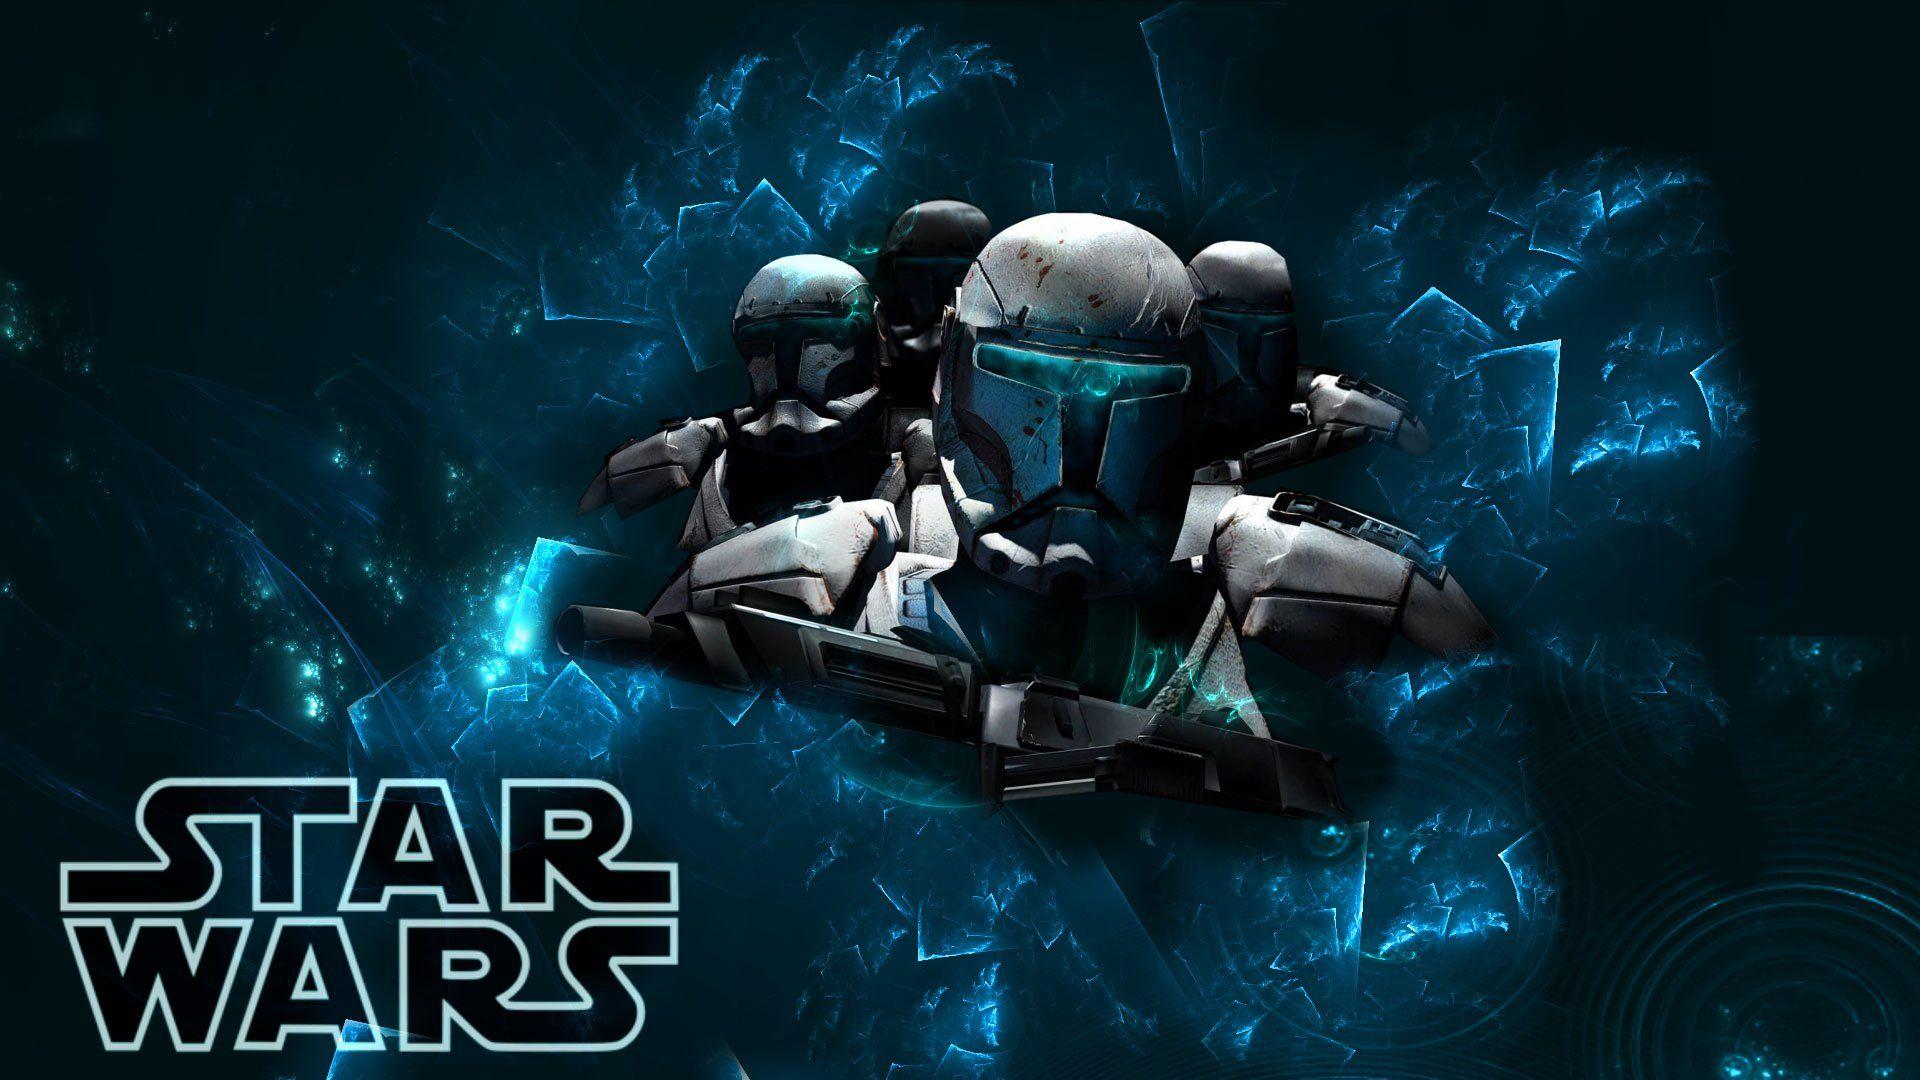 Star Wars Live Wallpapers Top Free Star Wars Live Backgrounds Wallpaperaccess